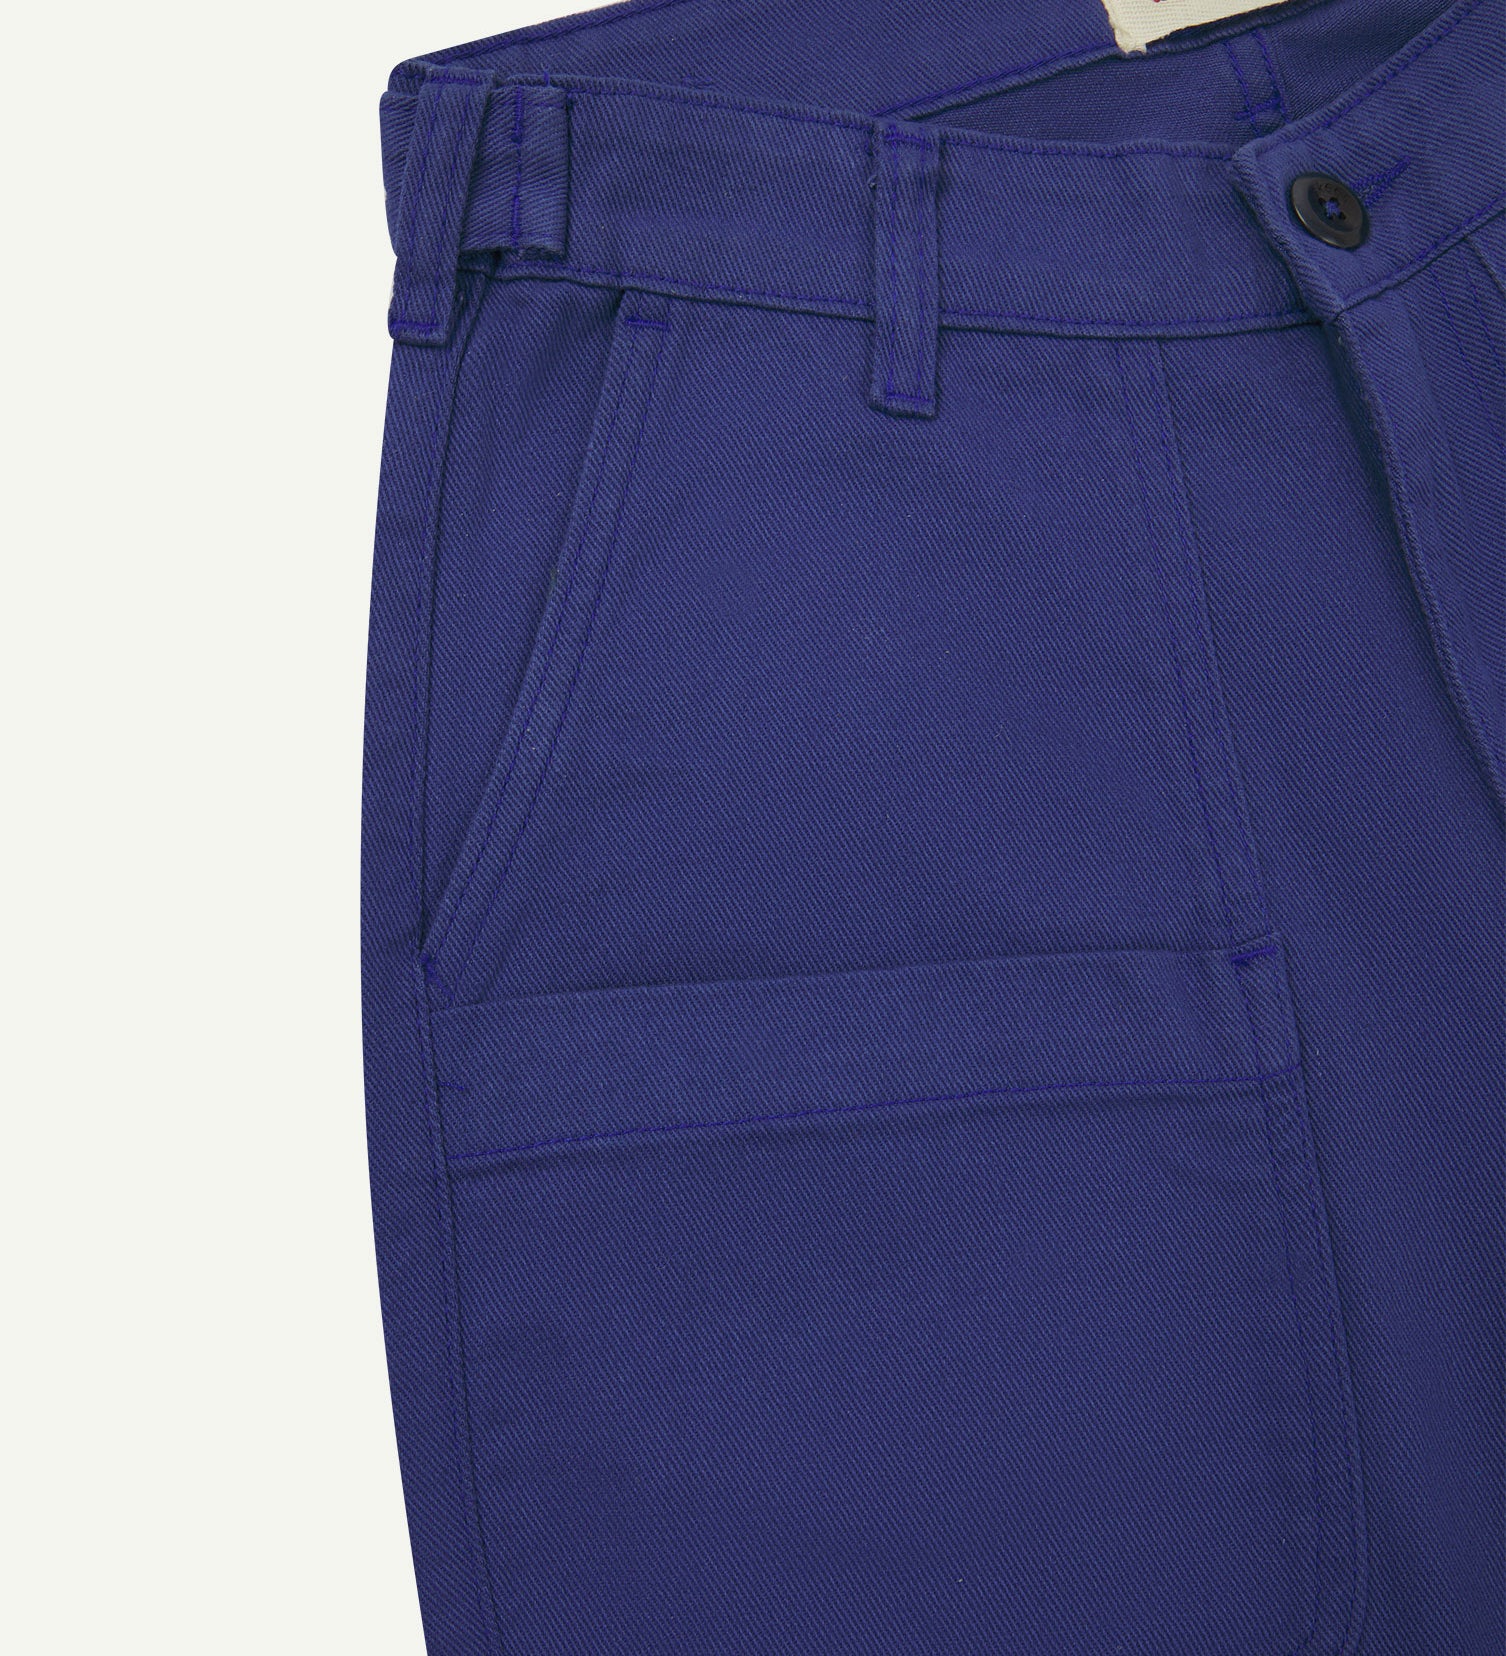 Front close-up of 5013 Uskees drill straight leg pants in ultra blue, with focus on front pockets, layered pockets, belt loops waistband and Uskees branding label.